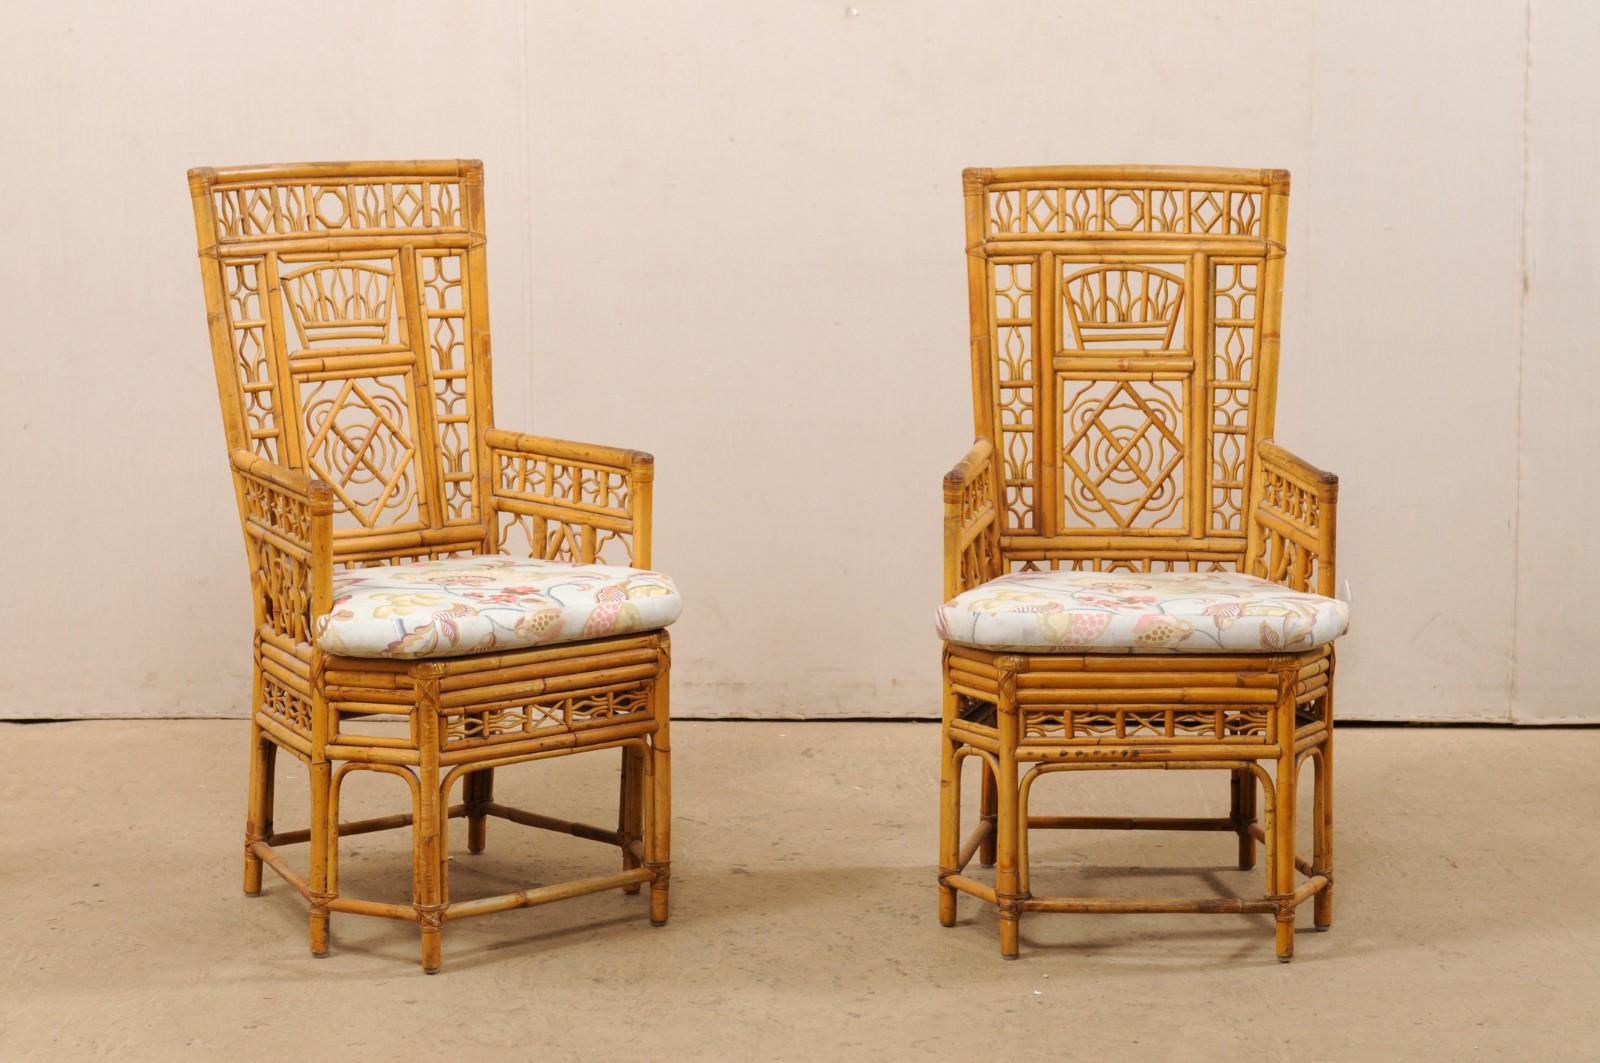 A pair of ornate bamboo armchairs with upholstered seat cushions. This vintage pair Thai chairs feature bamboo frames, which have been constructed with intricately designed panels found throughout their backsides, arm rests, and skirting. The top